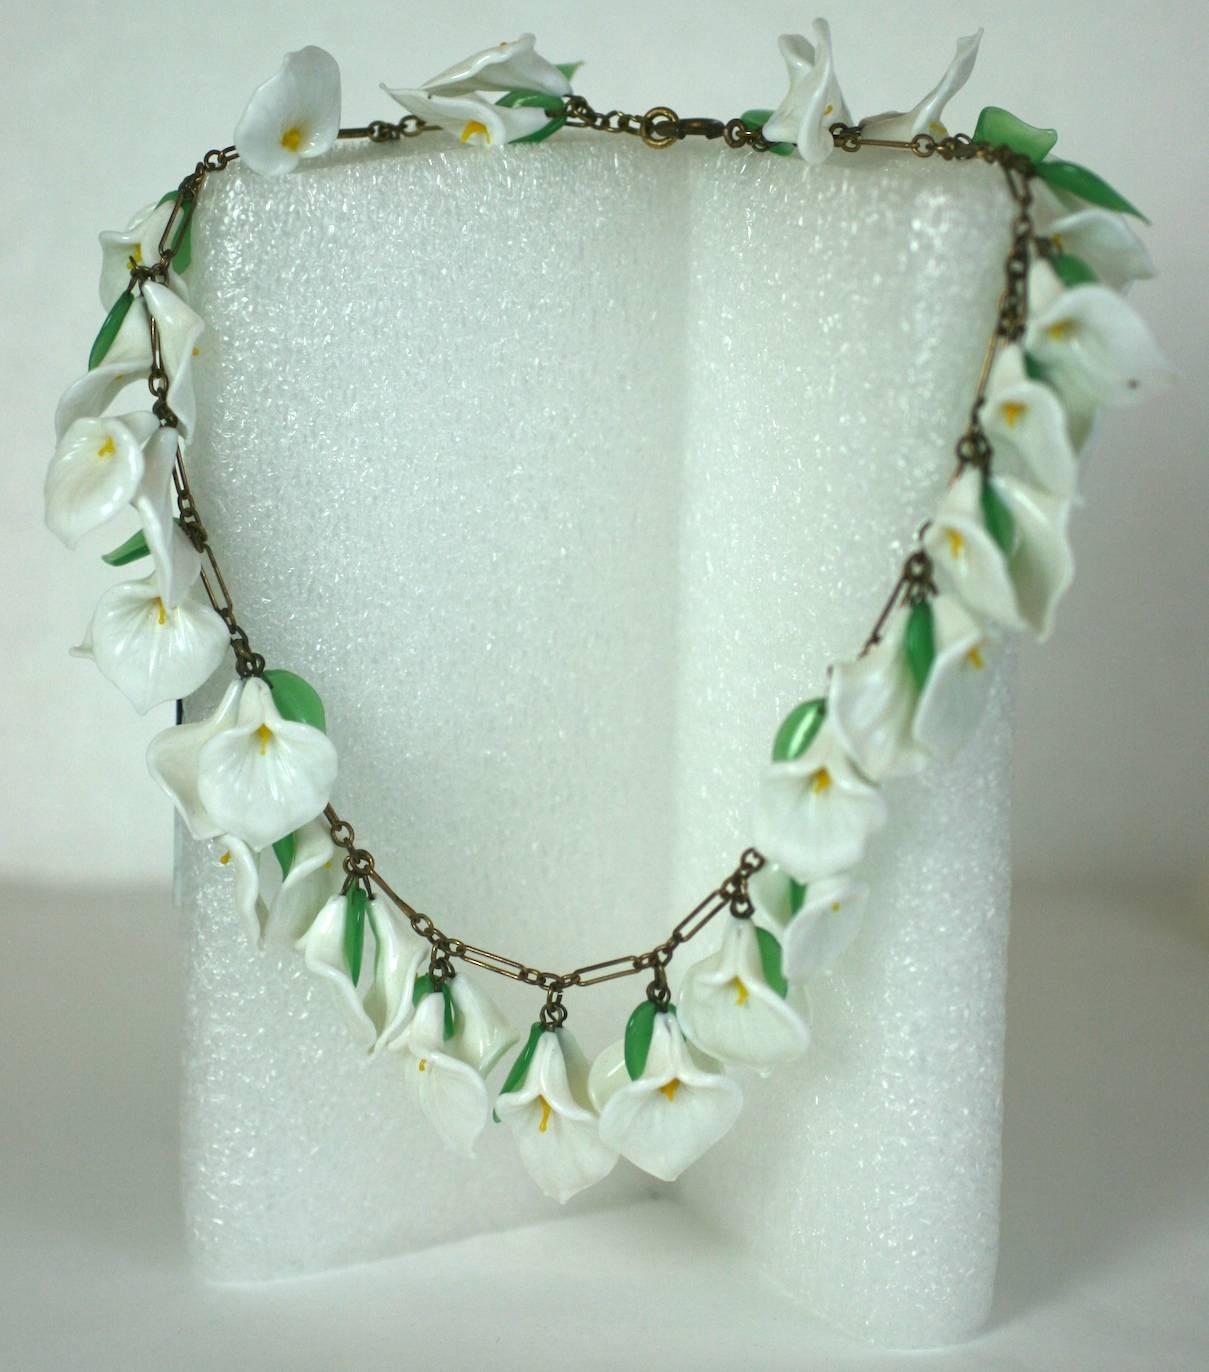 Antique Italian lampwork glass Calla Lily necklace circa 1930. Composed of hand made, milk glass naturalistic flower heads and tiny green leaves. Lovely, delicate craftsmanship, perfect for a summer wedding.  1930's Italy. 
Excellent